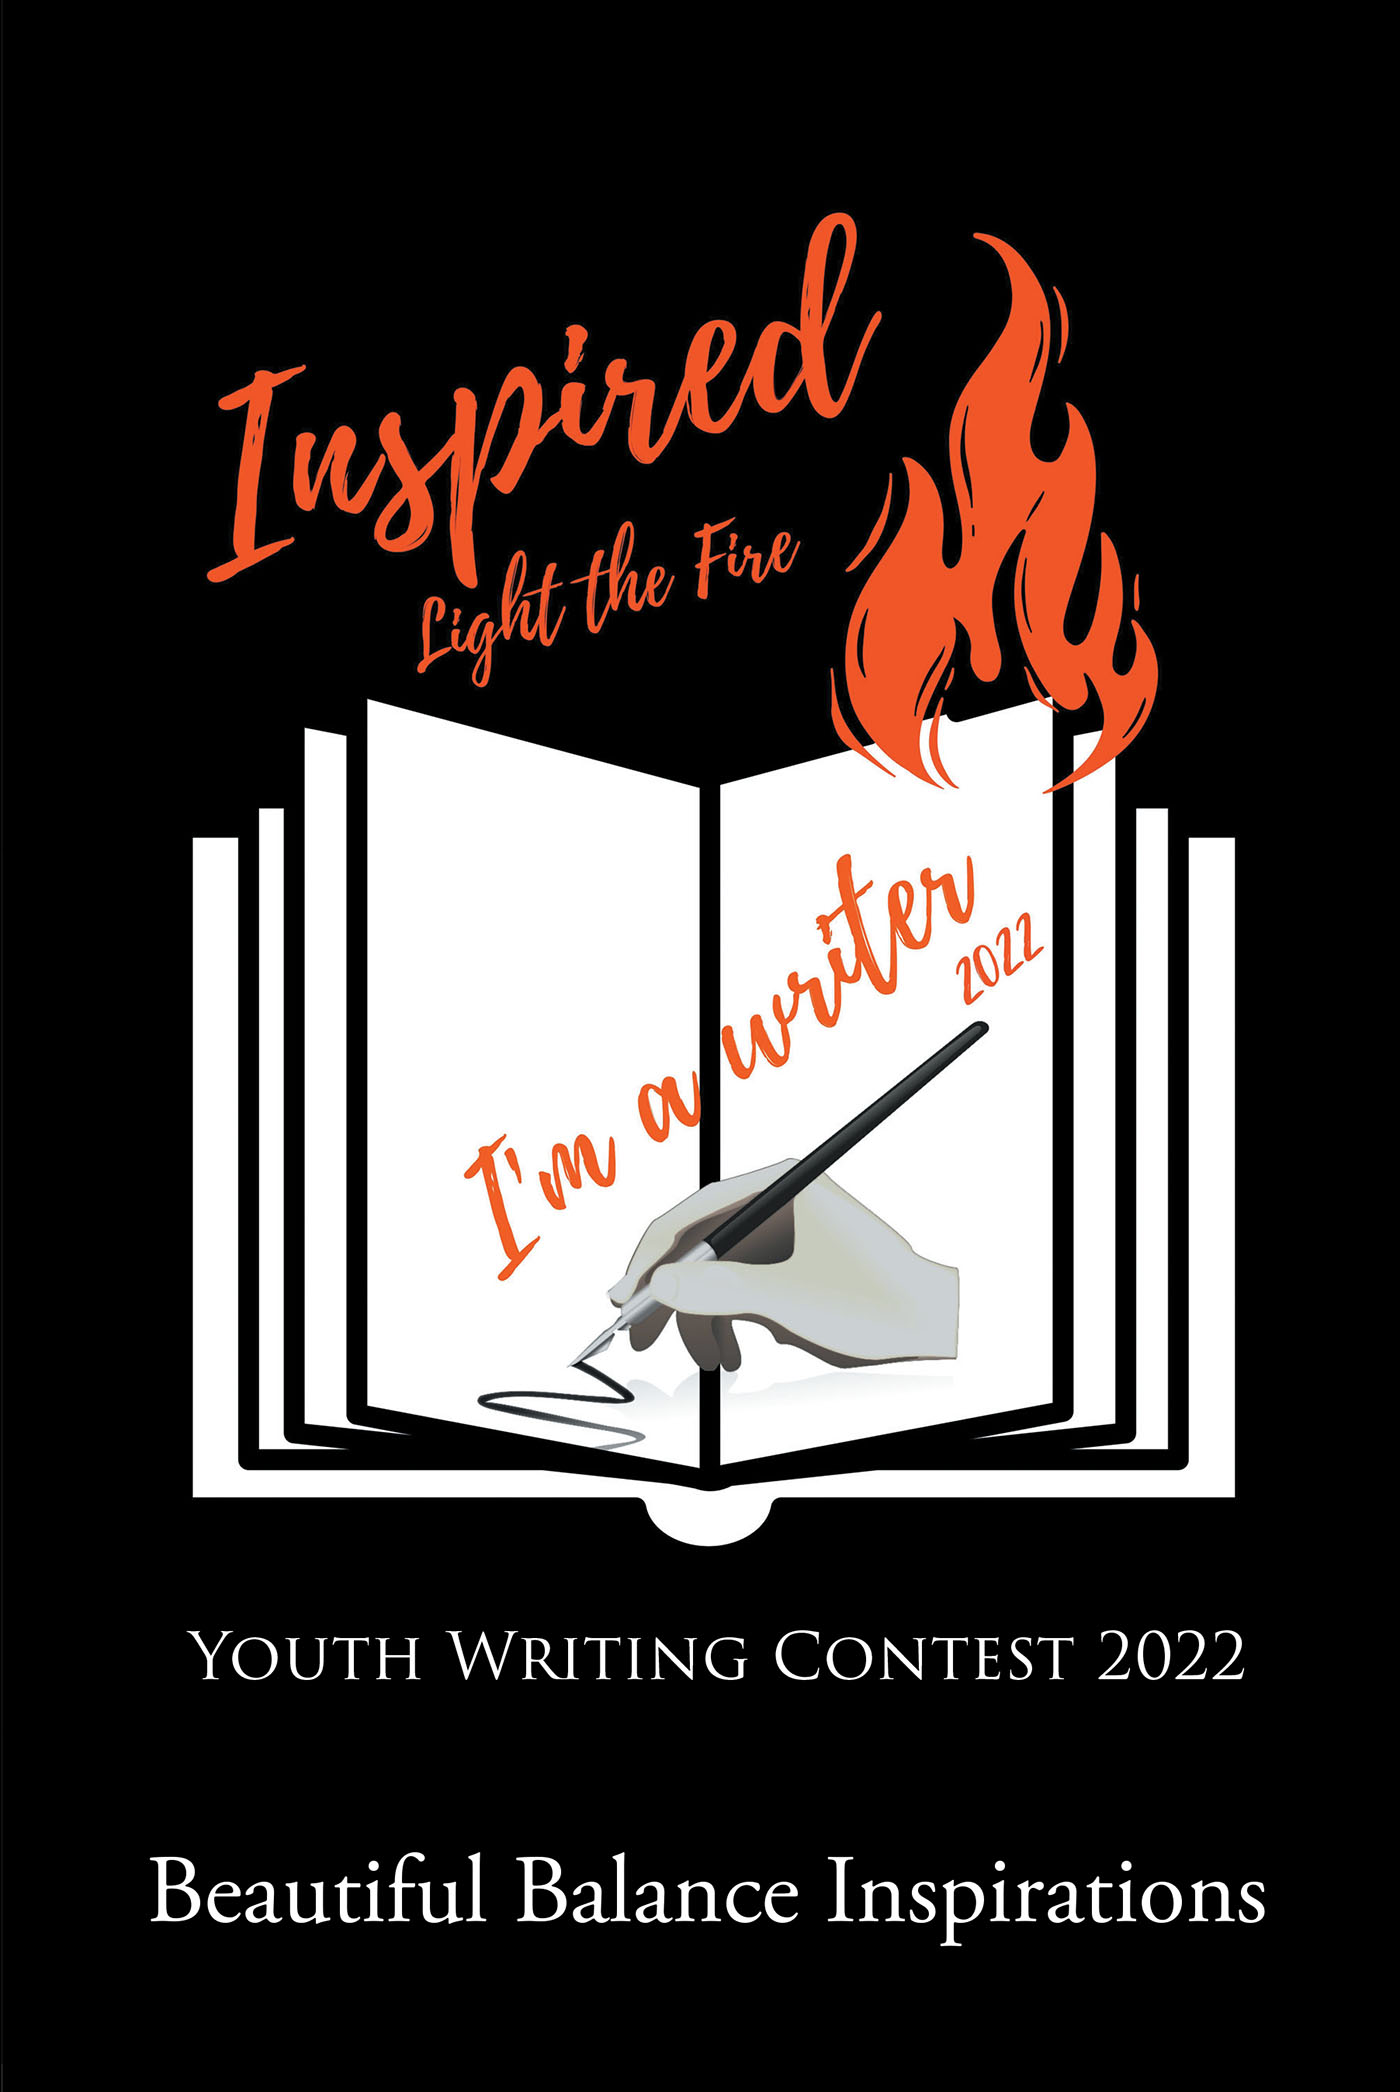 Author Beautiful Balance Inspirations’s New Book, "Inspired," is a Collection of Writings from Twenty-Four Young Winners of the 2022 Light the Fire Youth Writing Contest